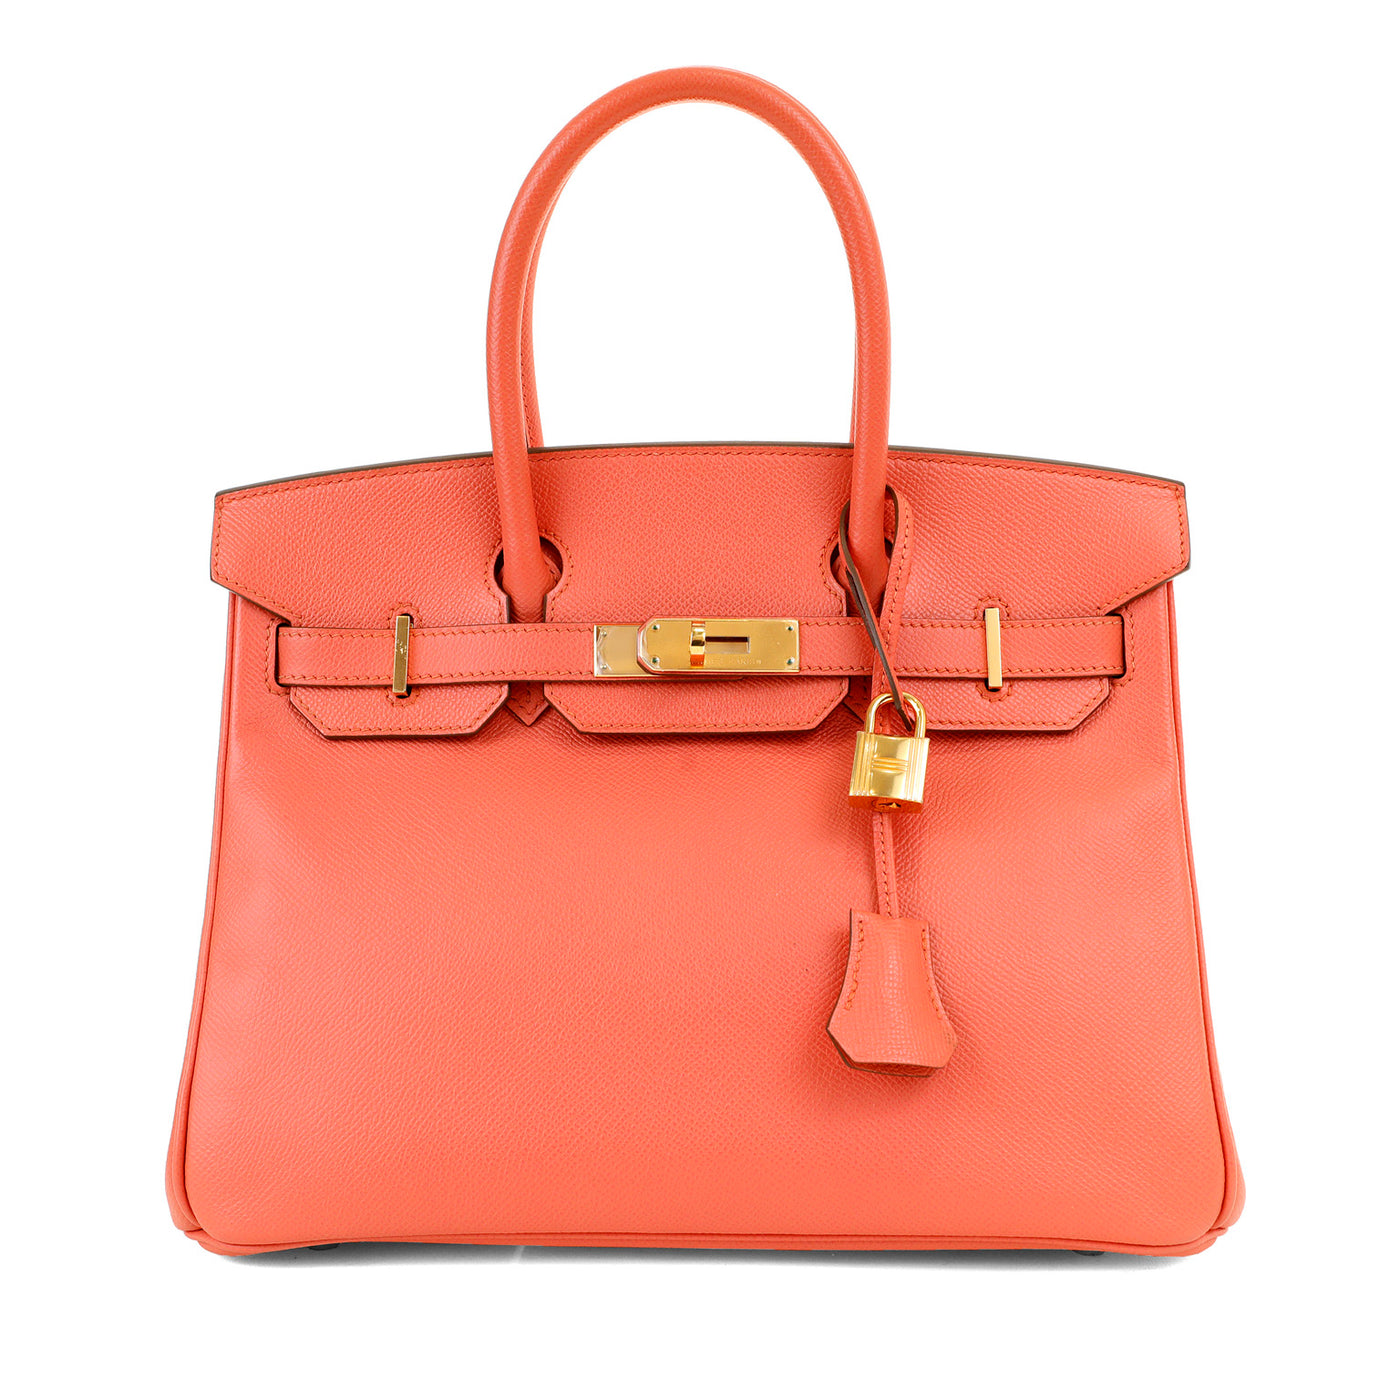 This pristine Hermès 30 cm Birkin in a vibrant orange-pink shade is a must-have for luxury lovers